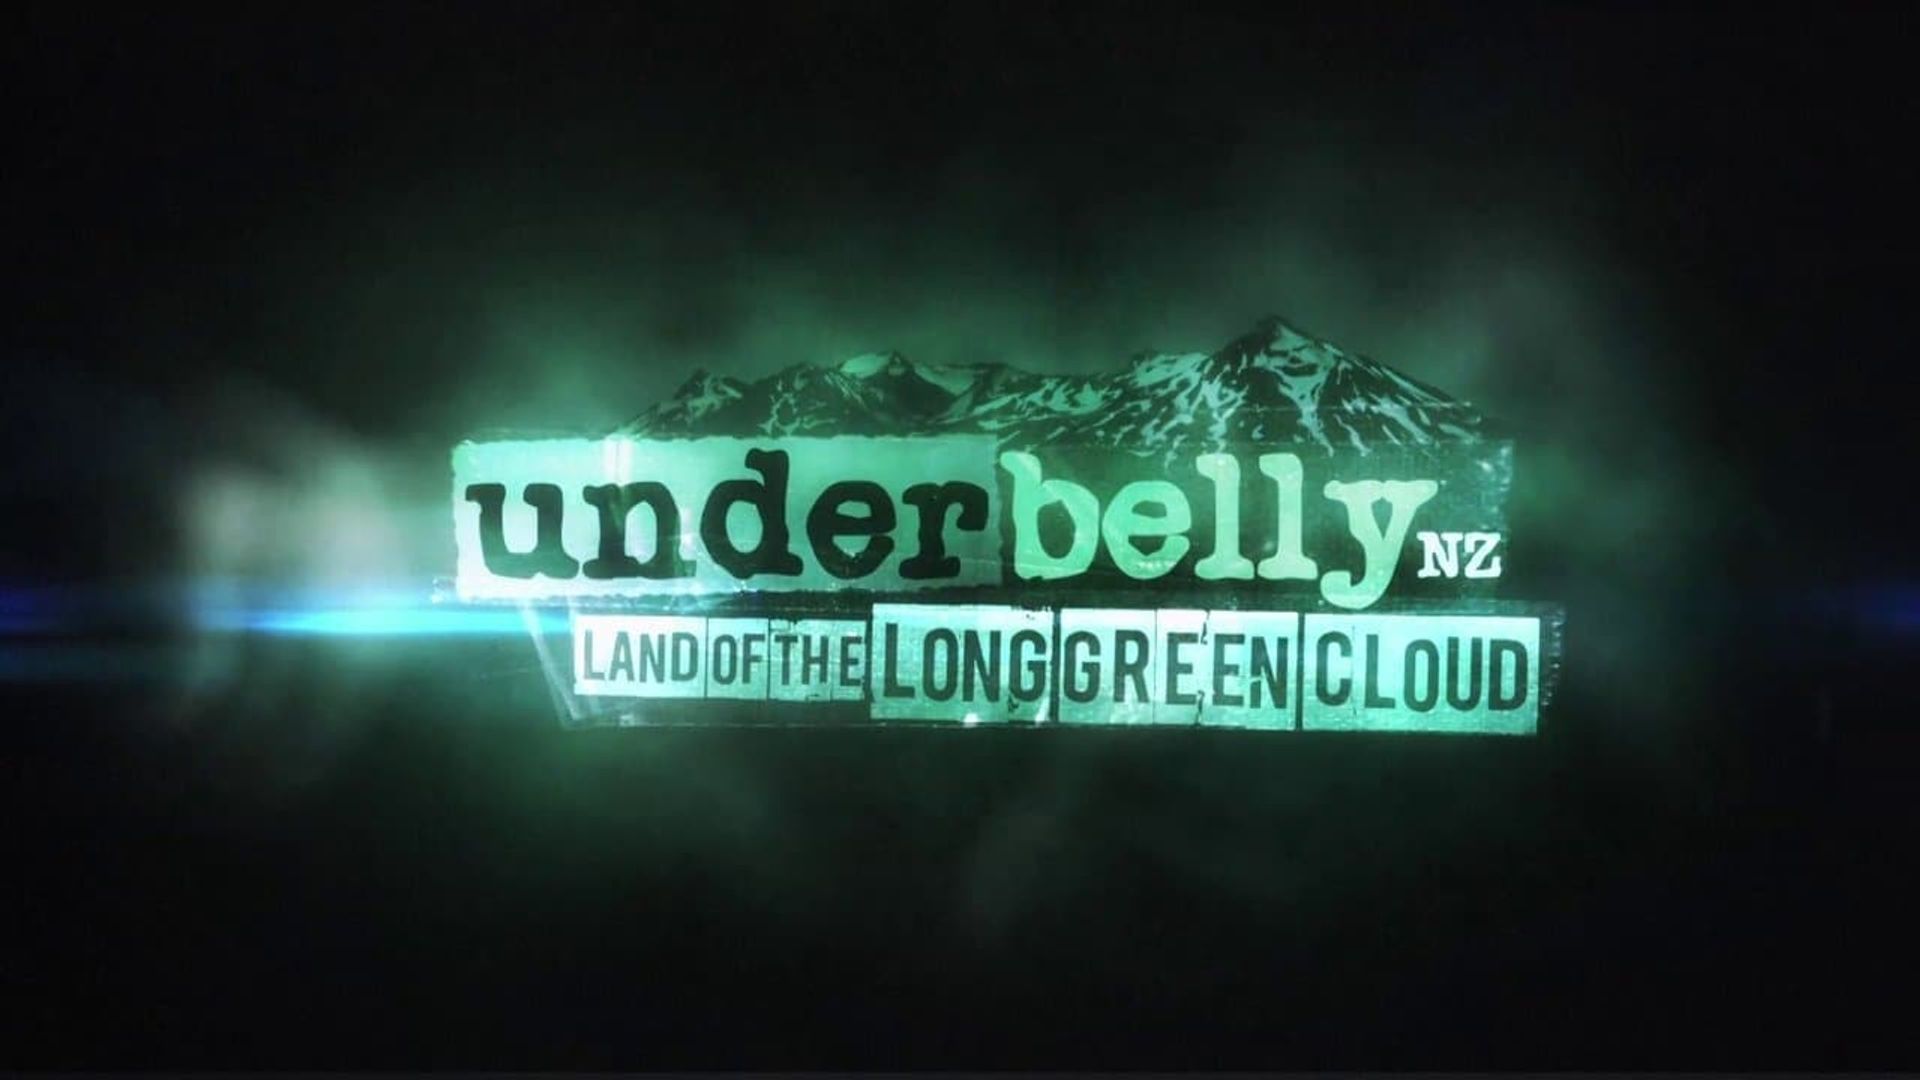 Underbelly: Land of the Long Green Cloud background